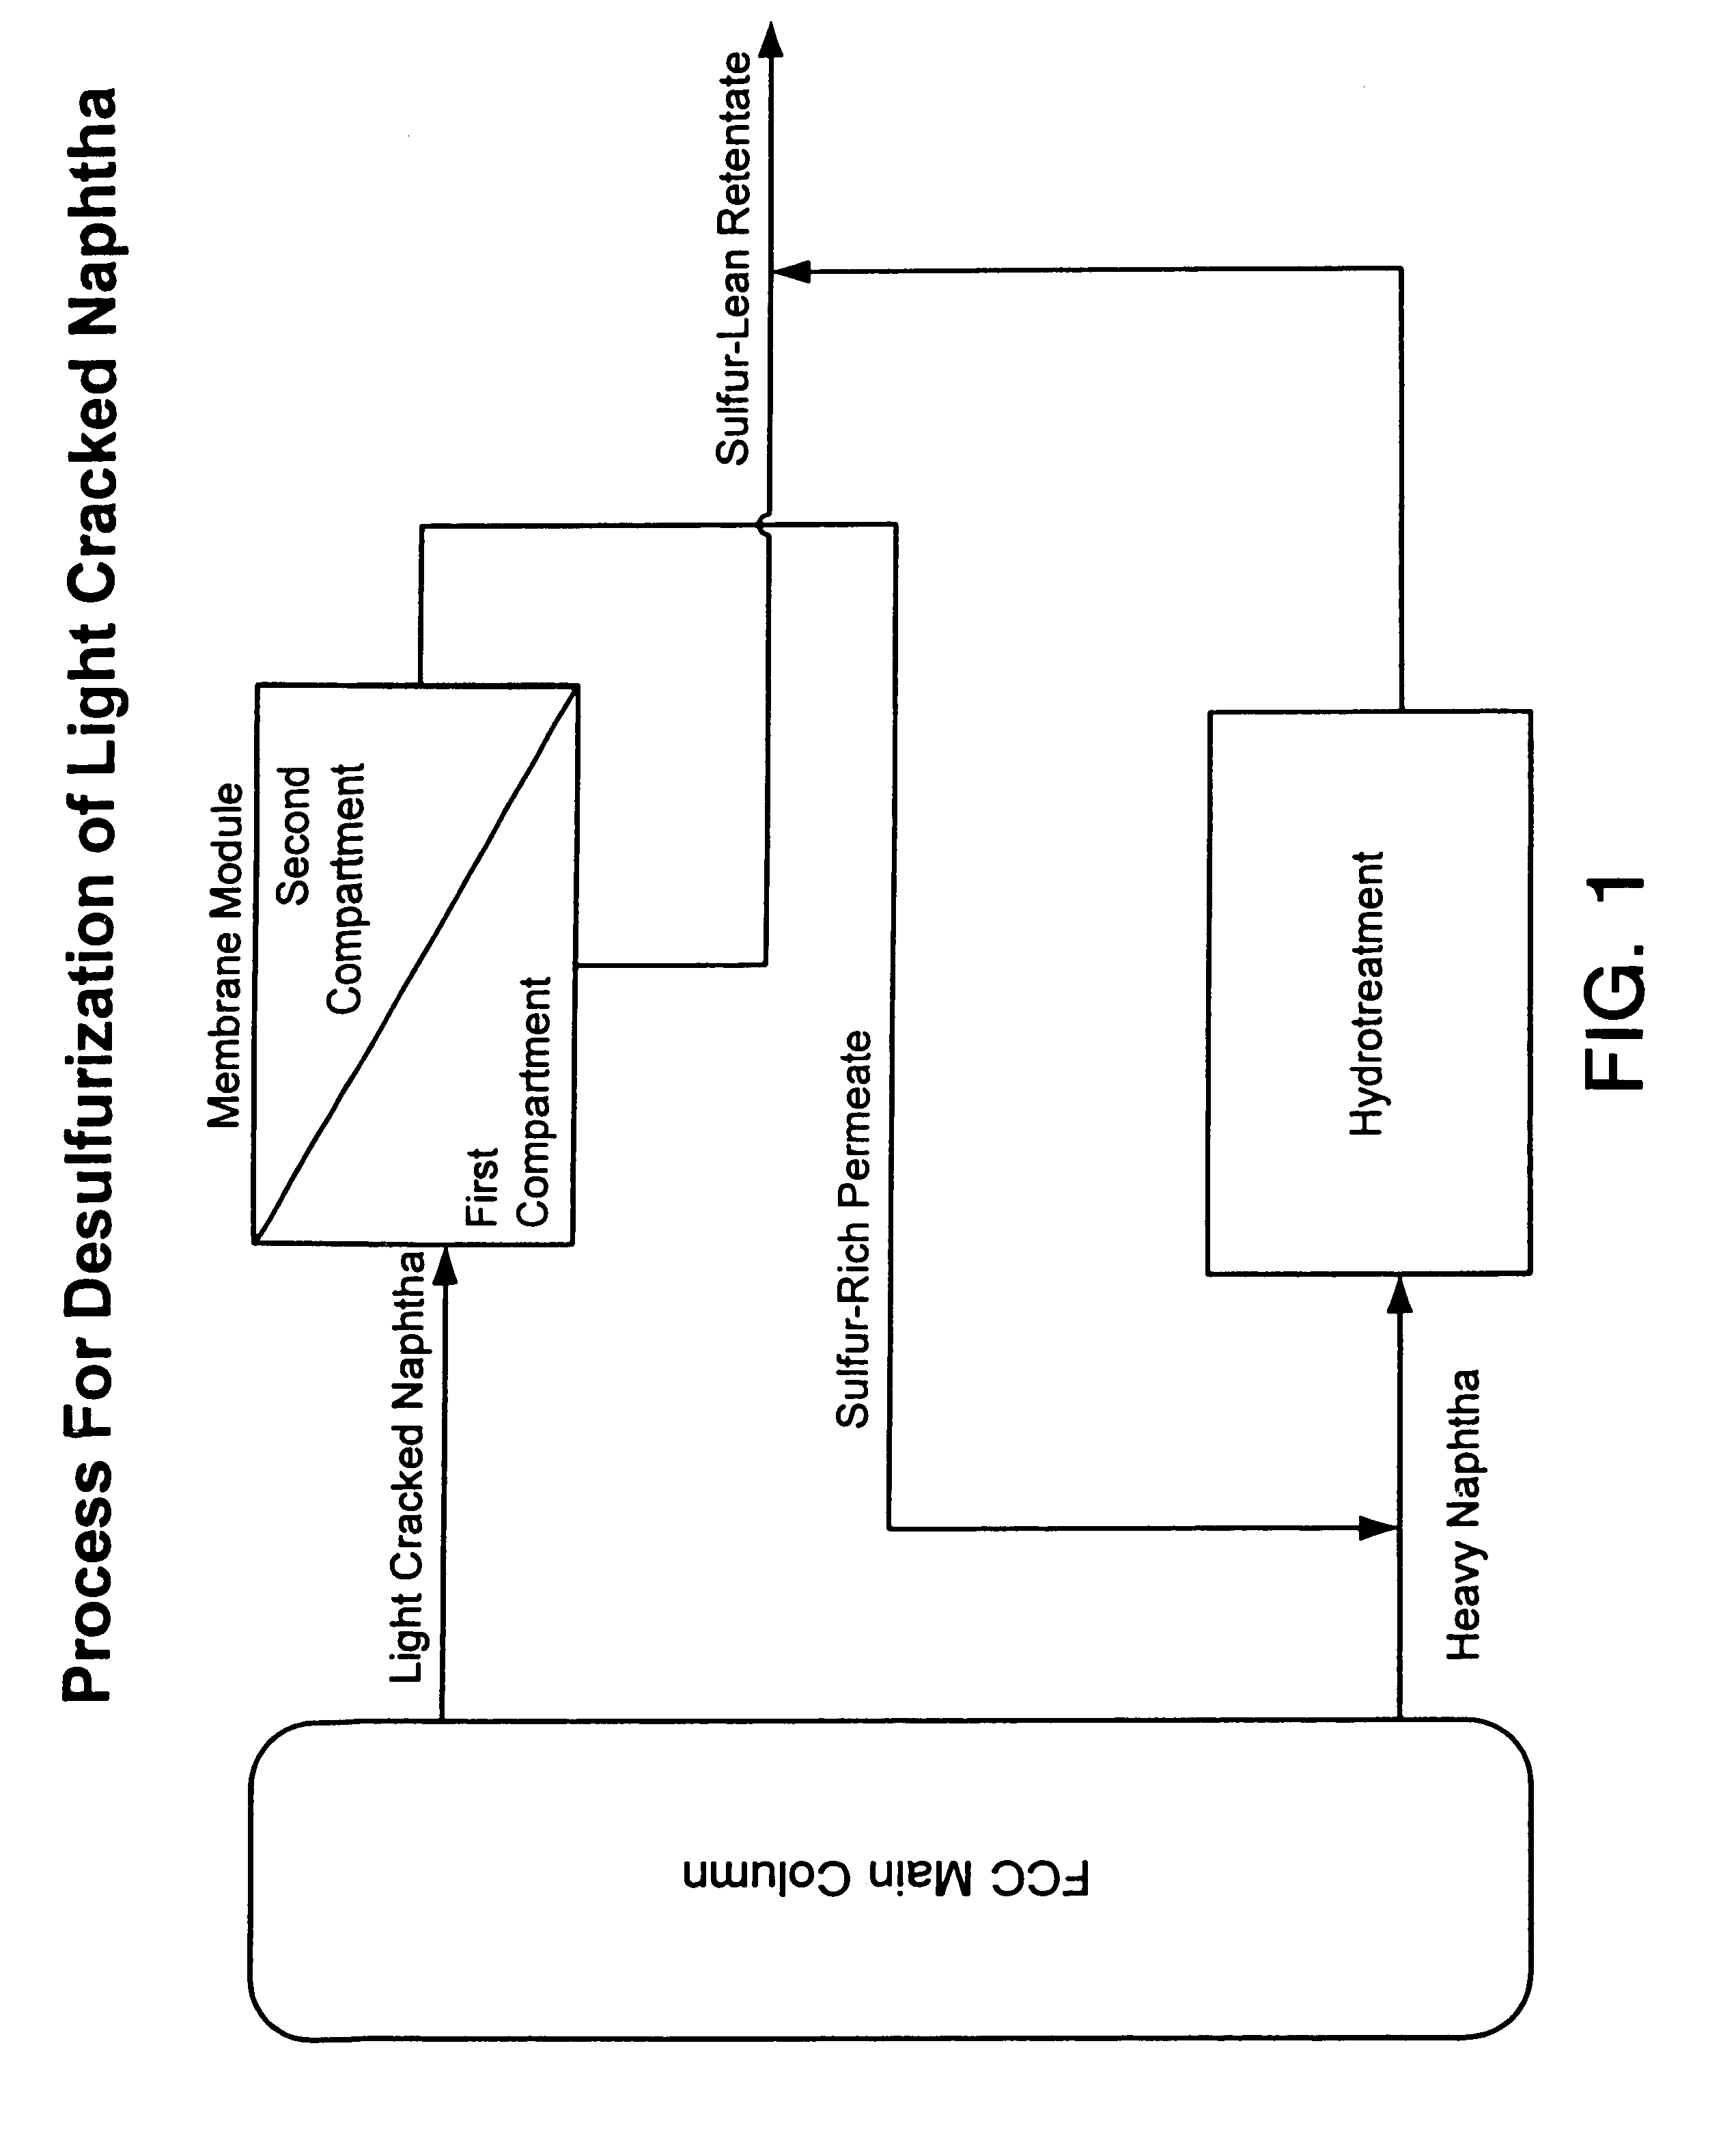 Membrane process for separating sulfur compounds from FCC light naphtha